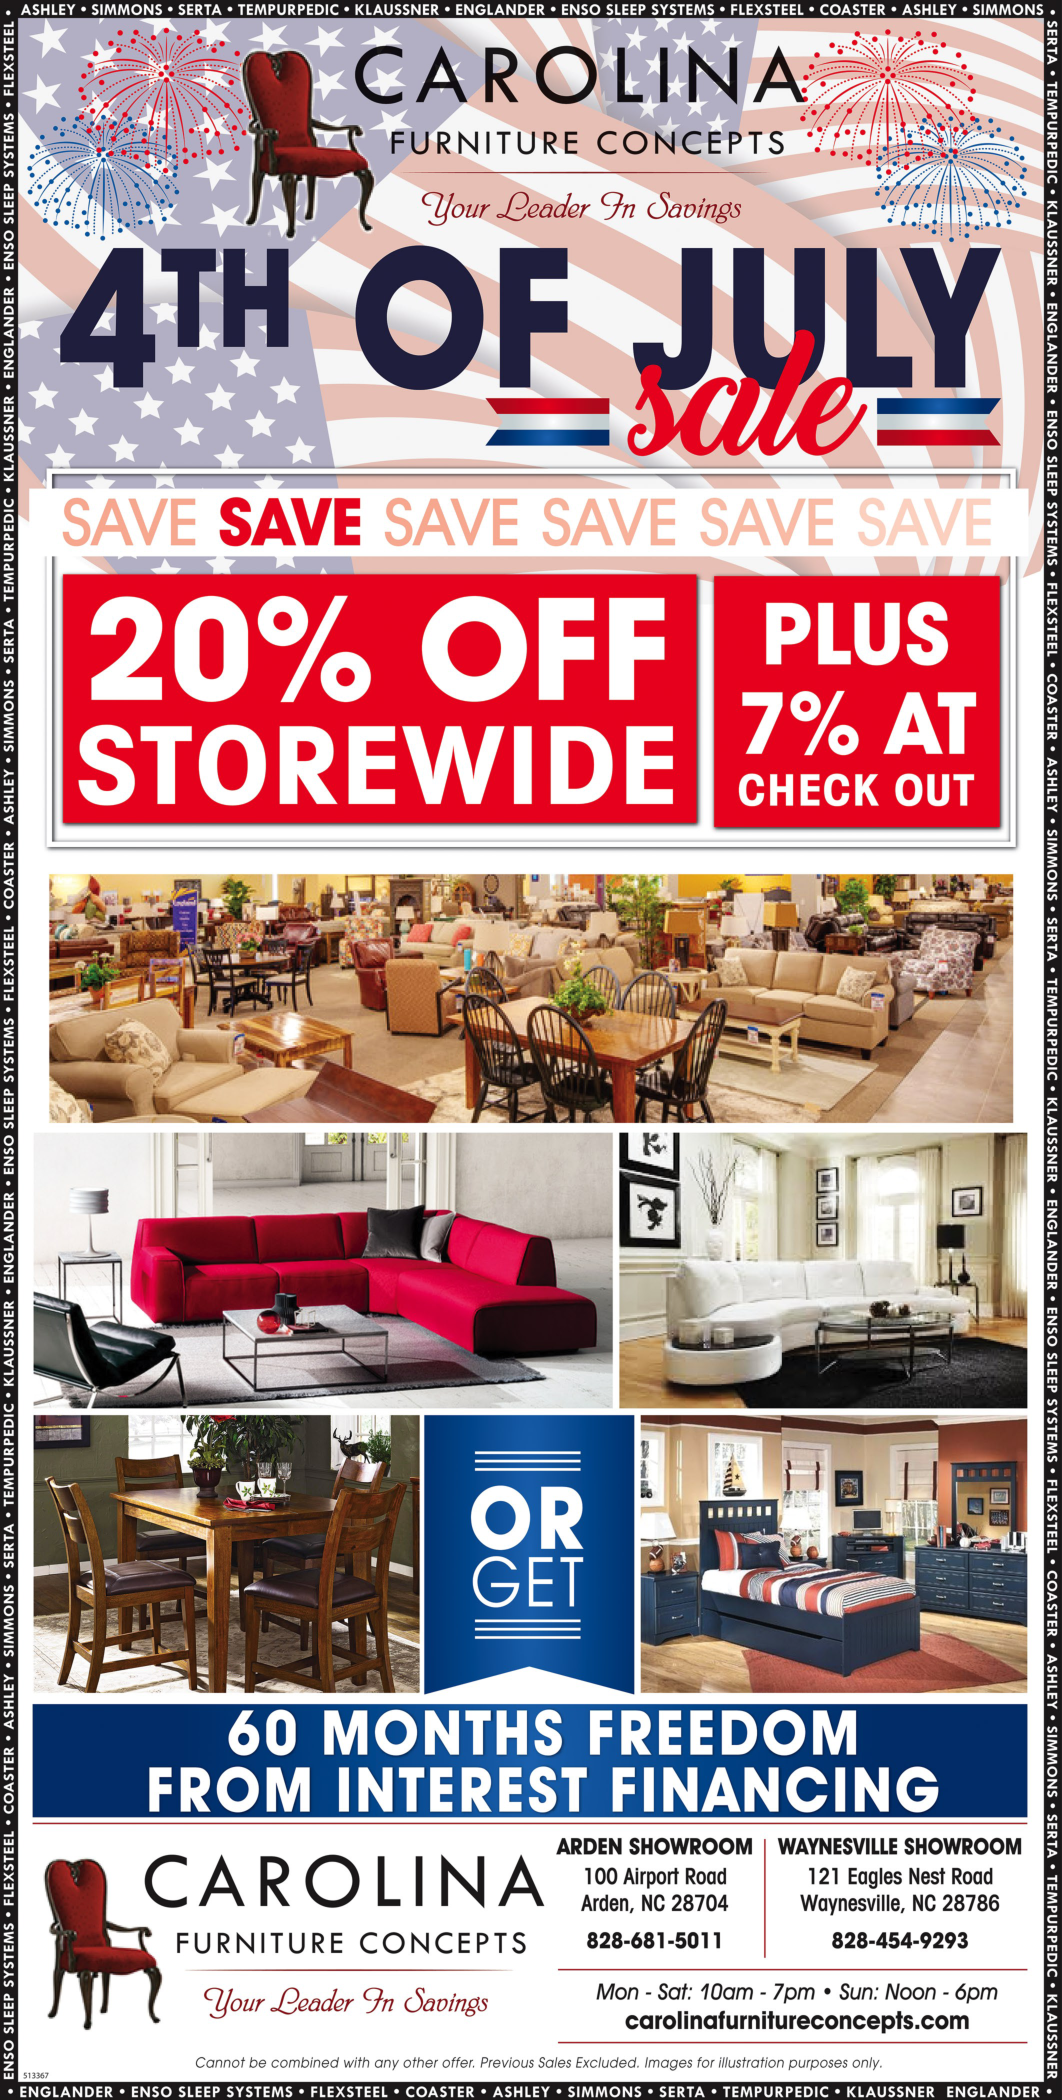 Best Furniture Sale On 4th Of July In Arden Nc Furniture